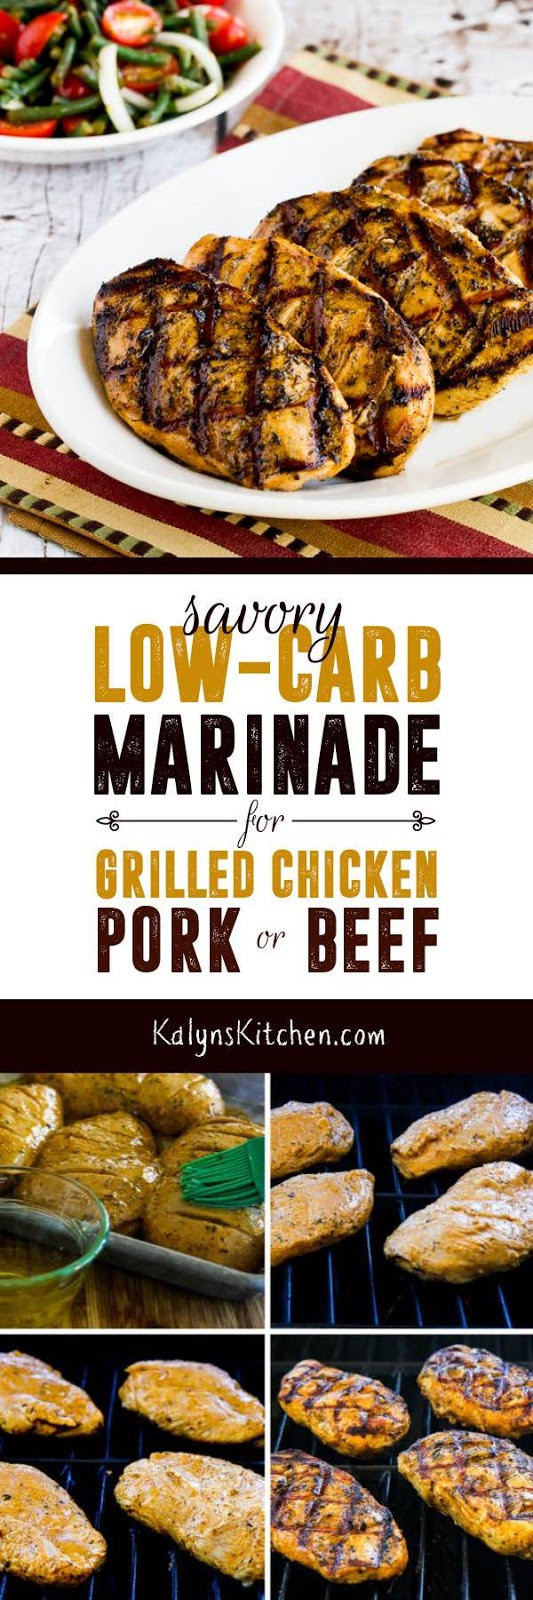 Low Carb Marinades
 Savory Low Carb Marinade for Grilled Chicken Pork or